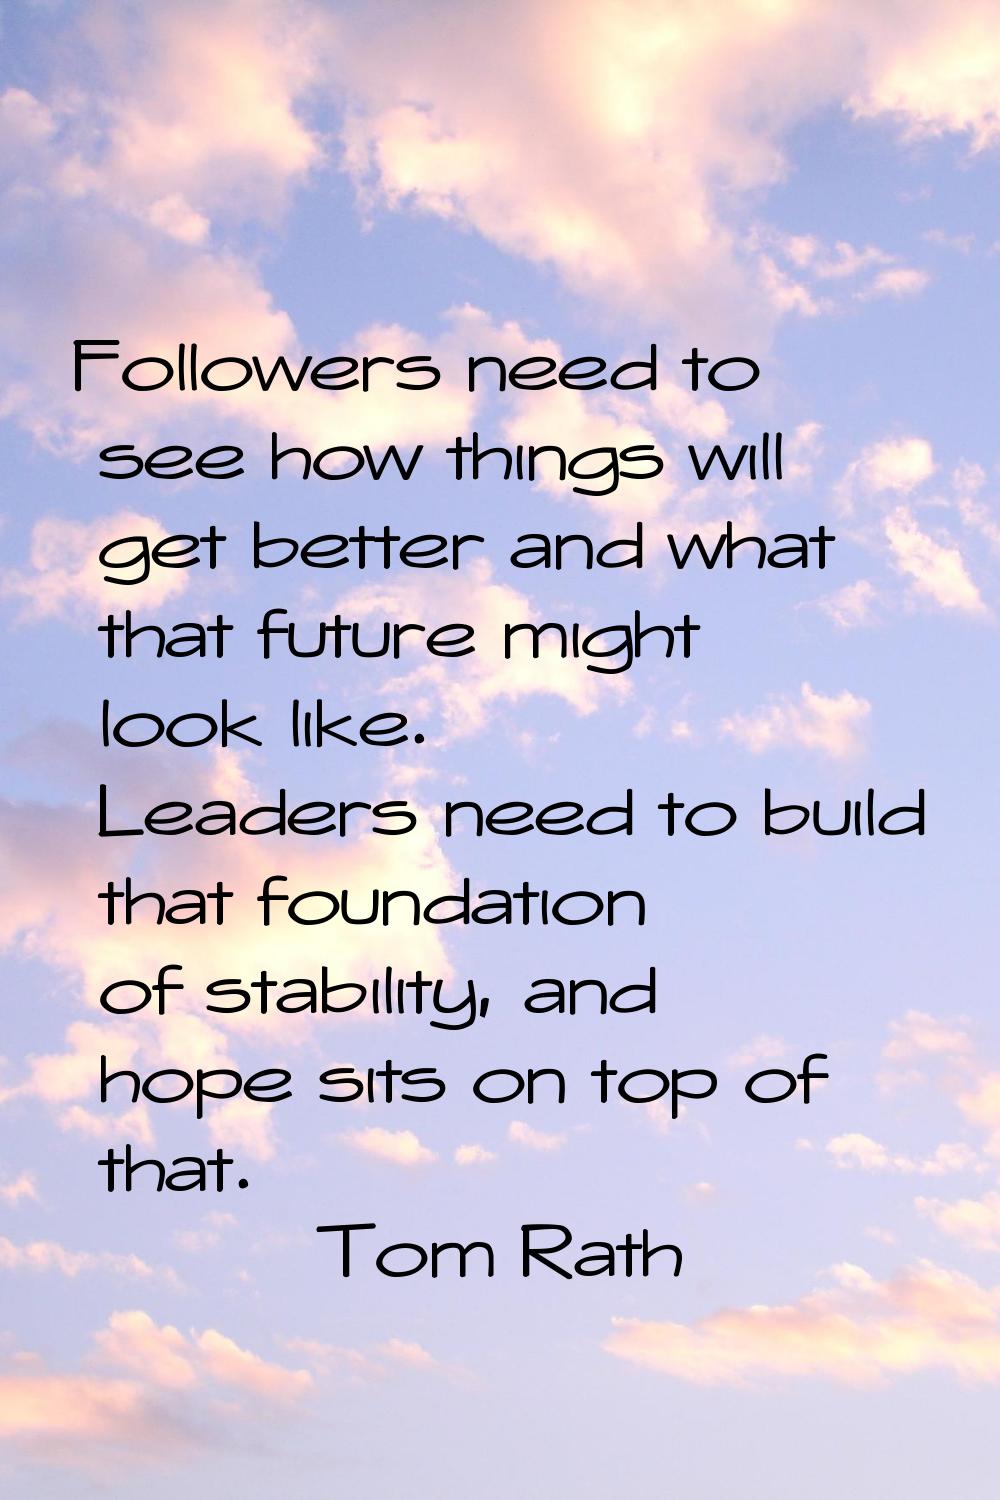 Followers need to see how things will get better and what that future might look like. Leaders need